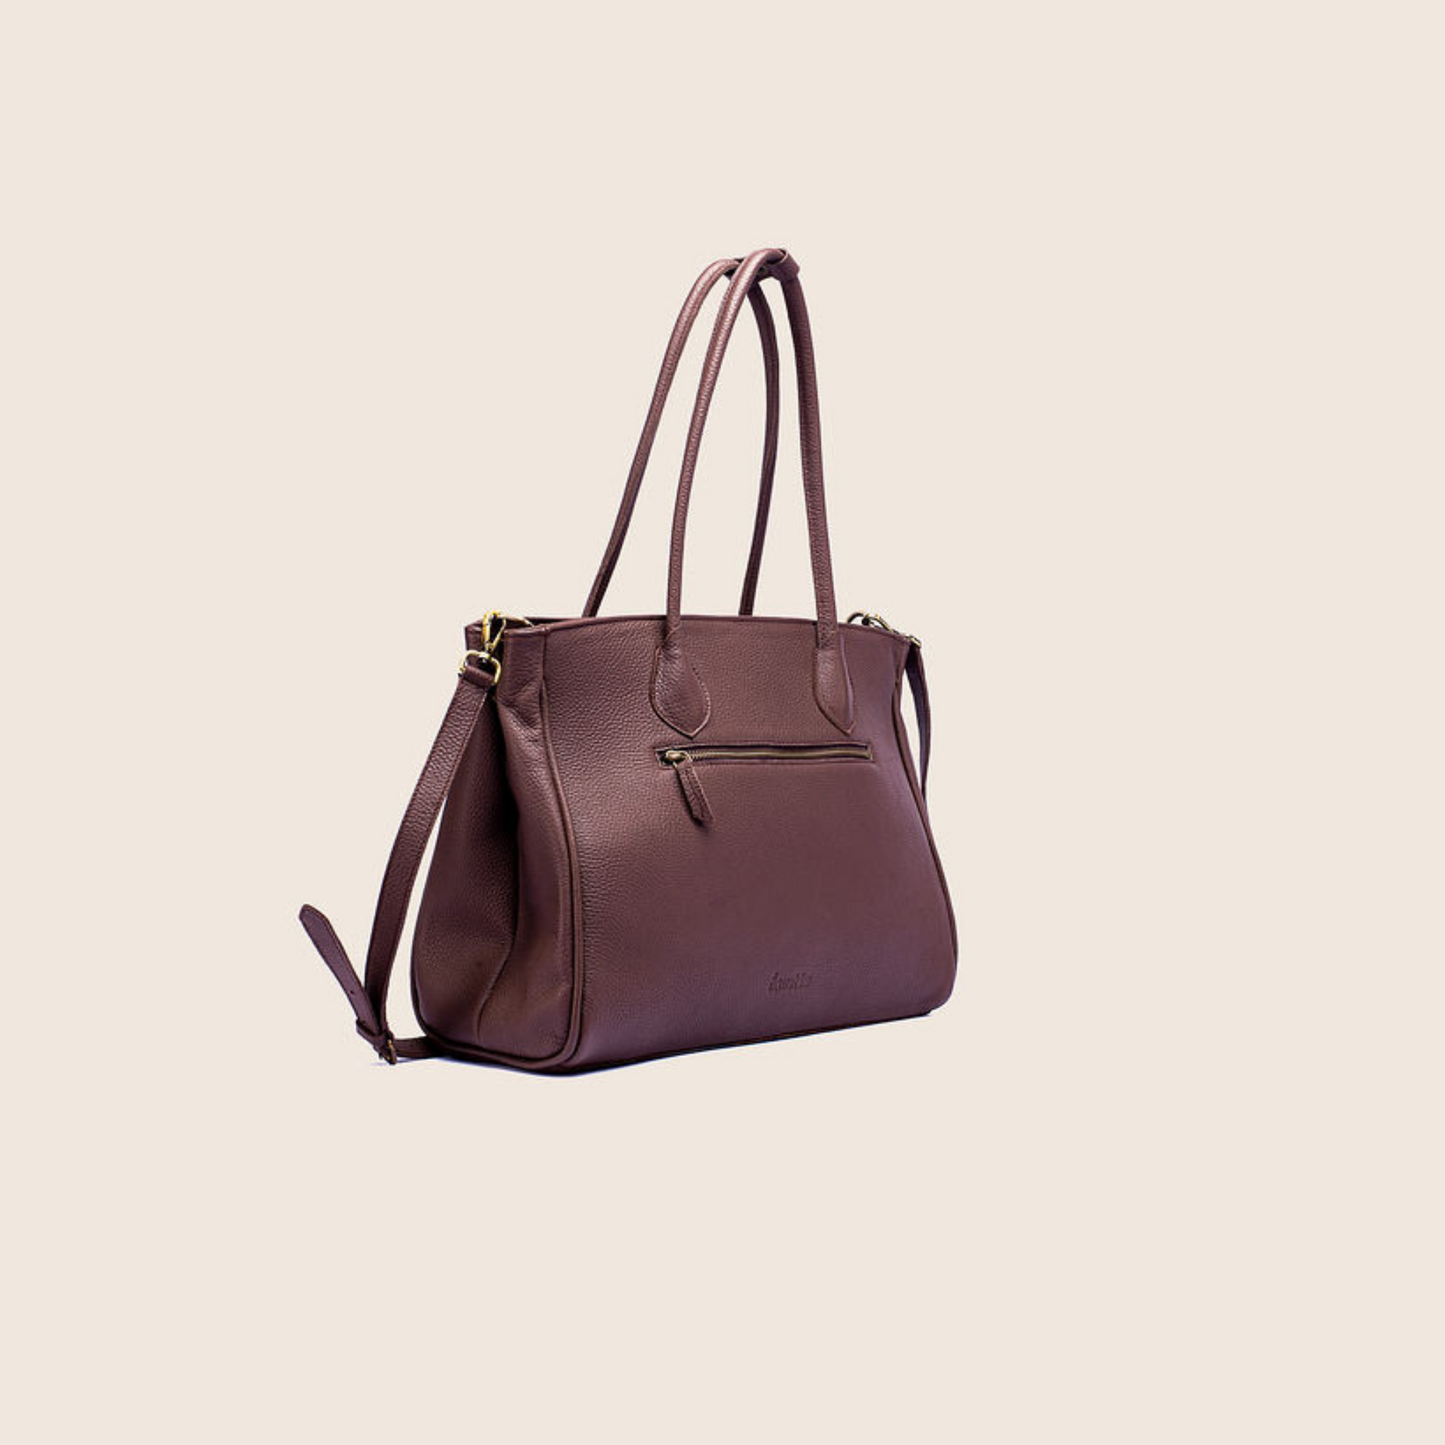 IT satchel bag in firedbrick natural dried milled leather